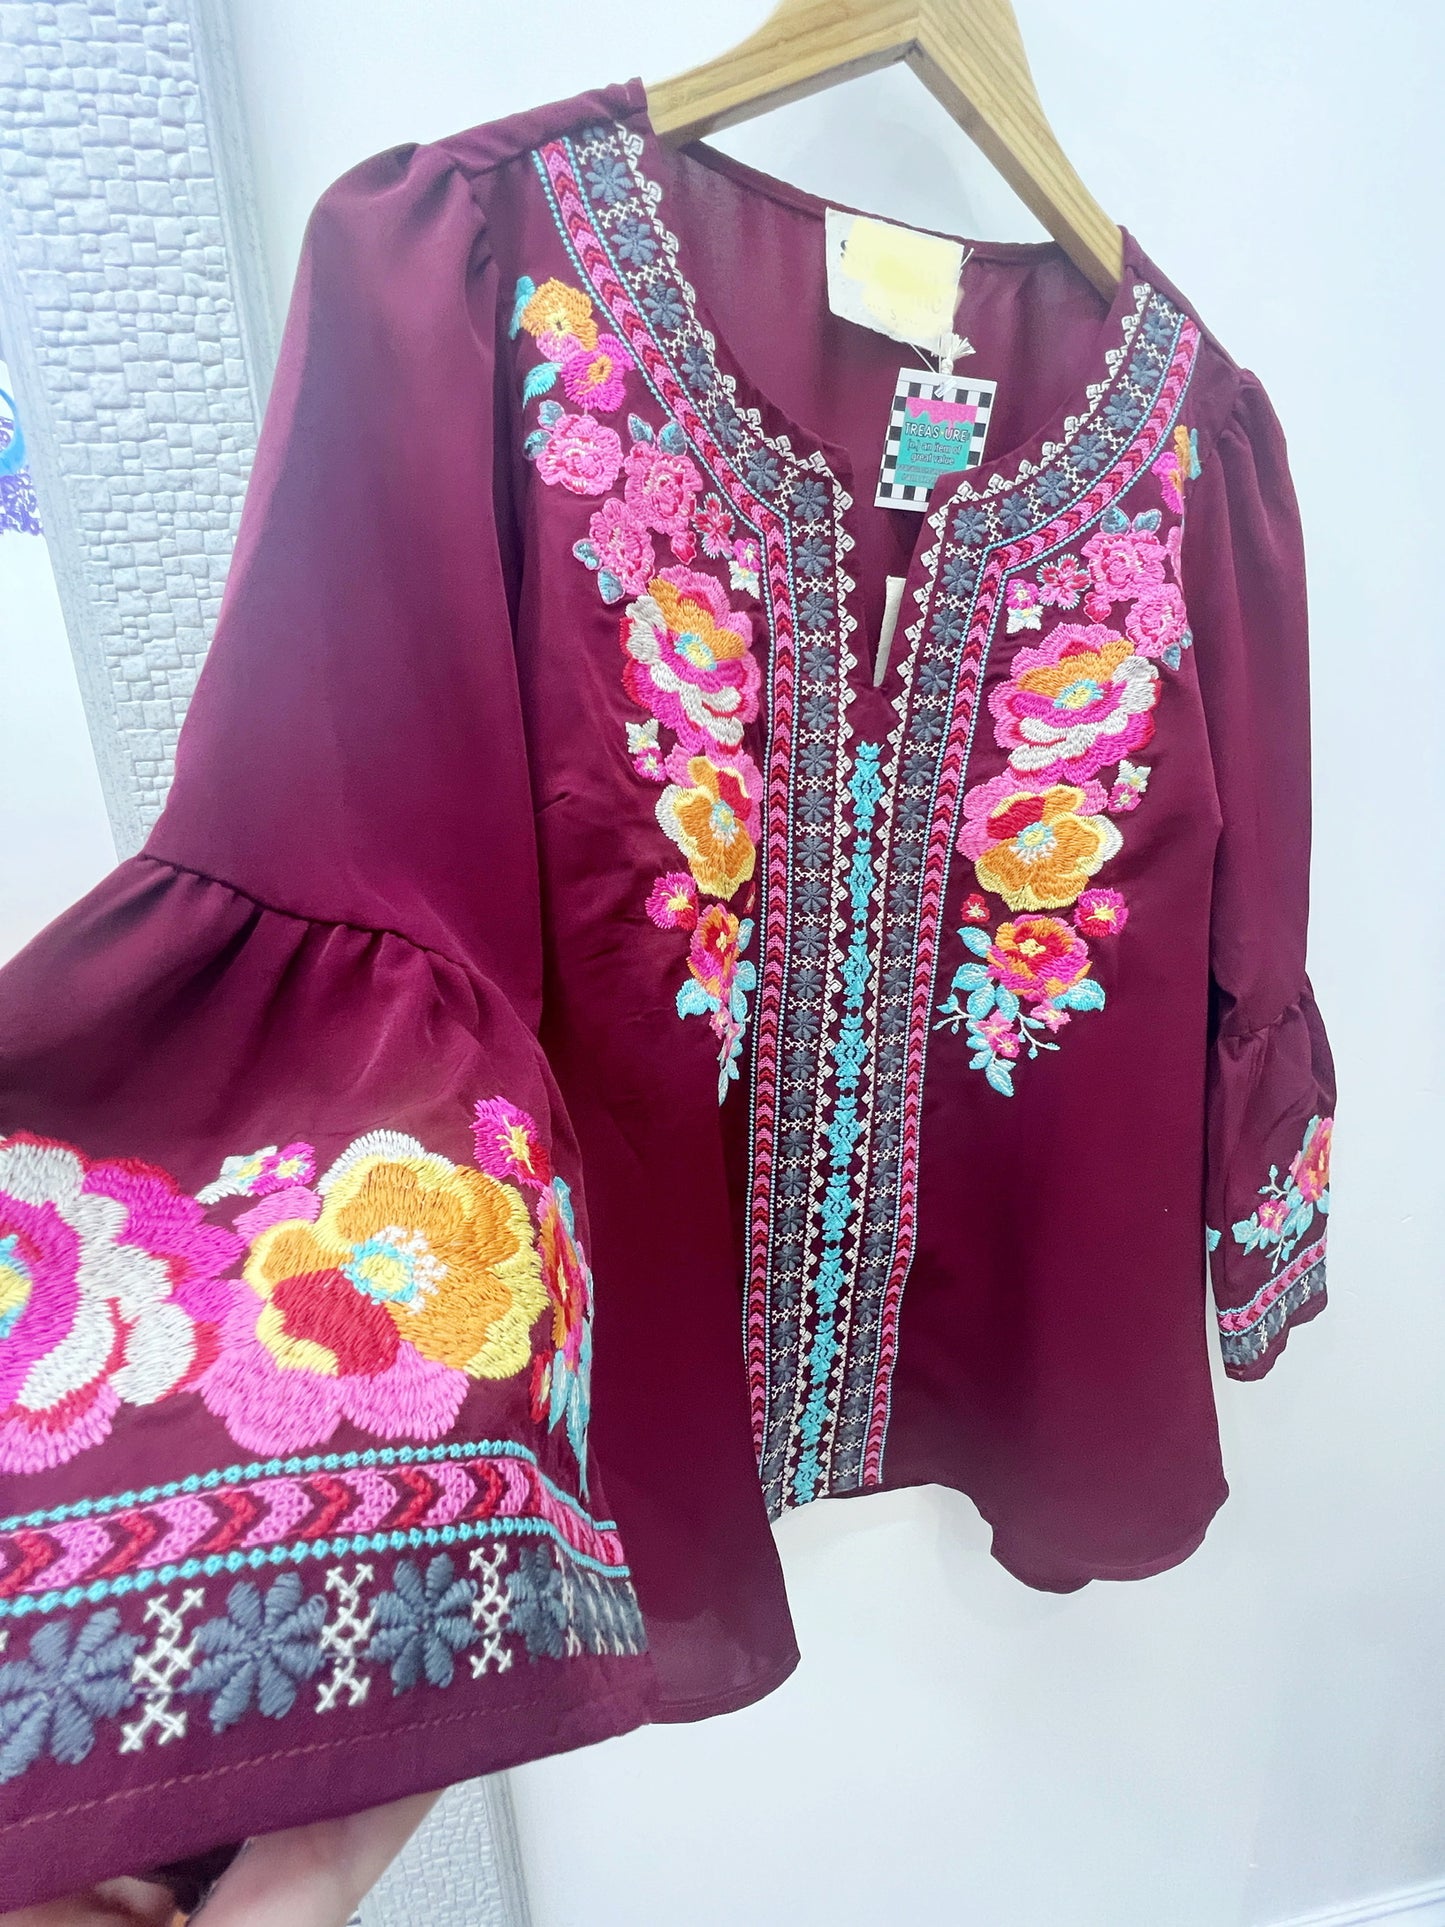 Marigold Embroidered Bell Sleeve Top [Maroon]